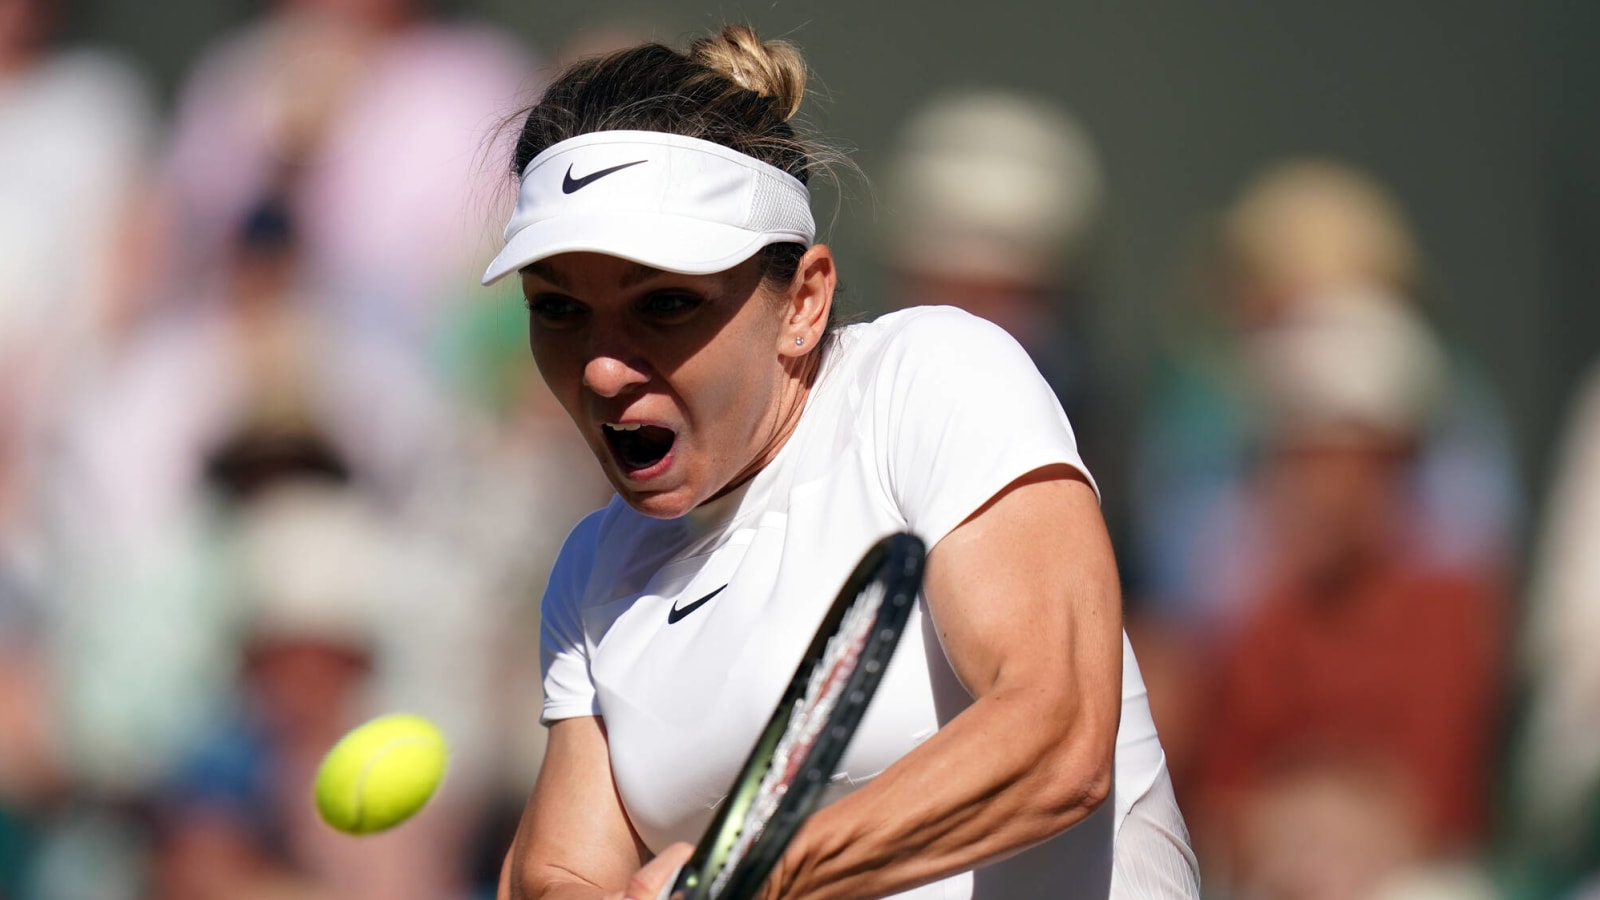 'Like a truck hit you': Simona Halep describes feelings when she found out about testing positive for banned substance